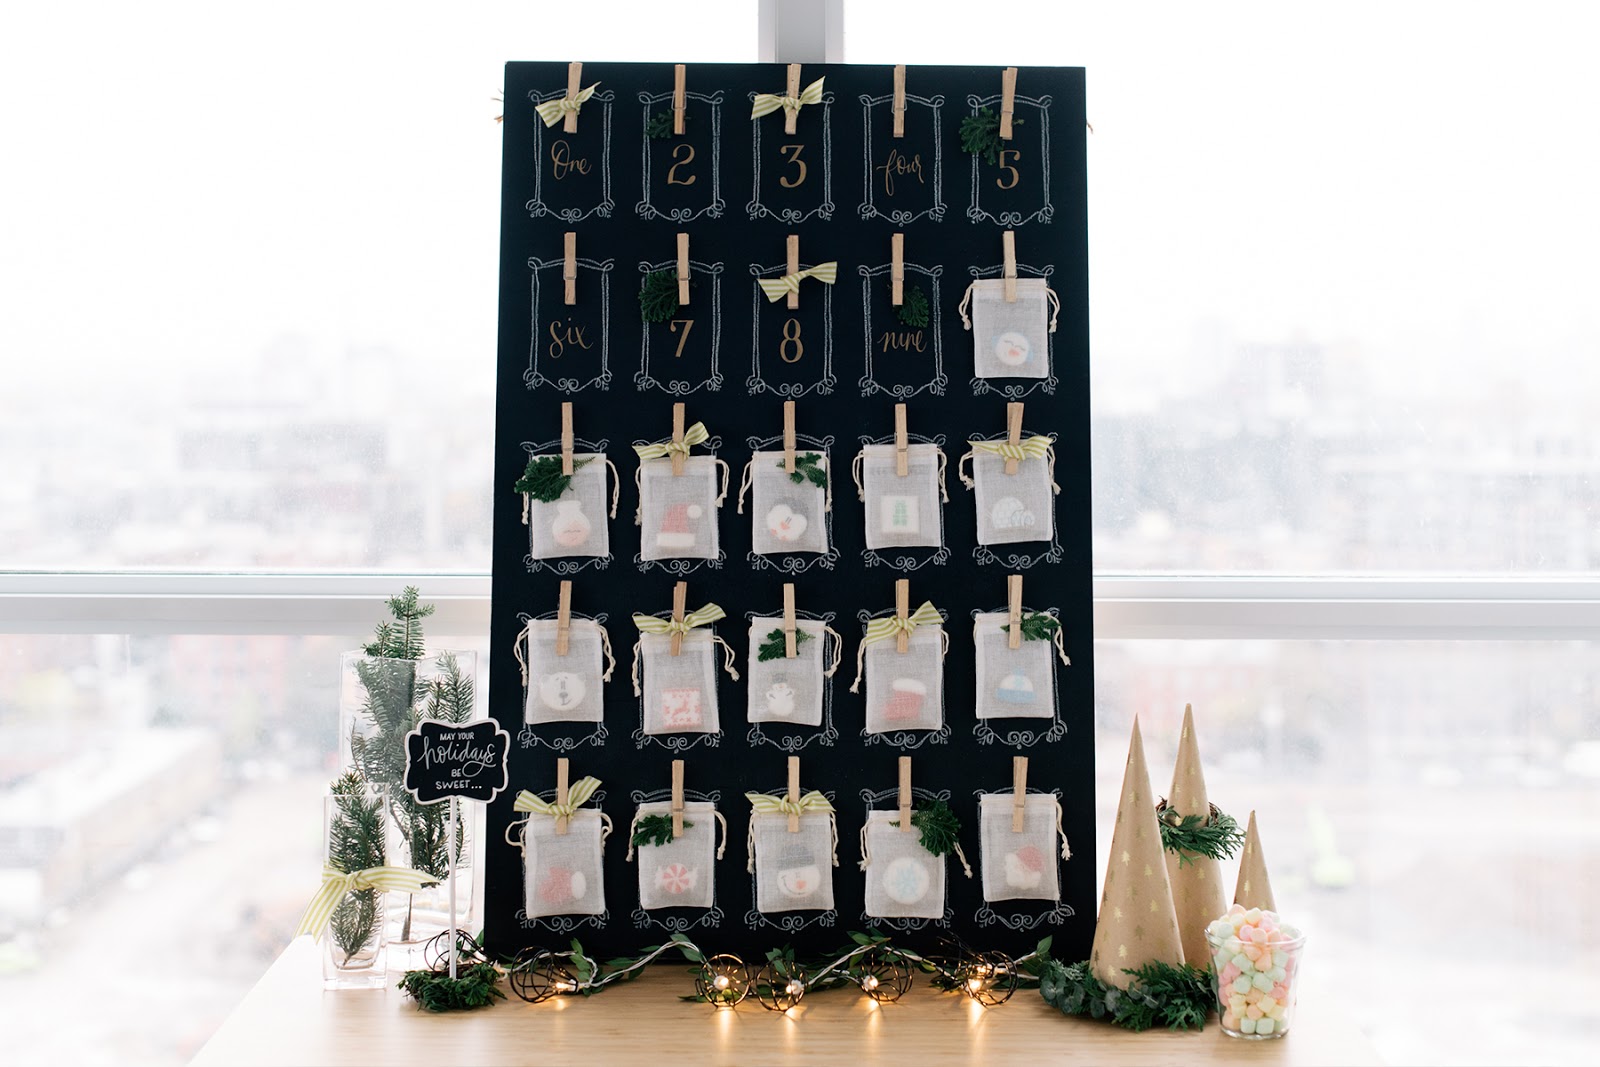 sweet countdown to the holiday idea using mini advent cookies and muslin bags | creativebag.com